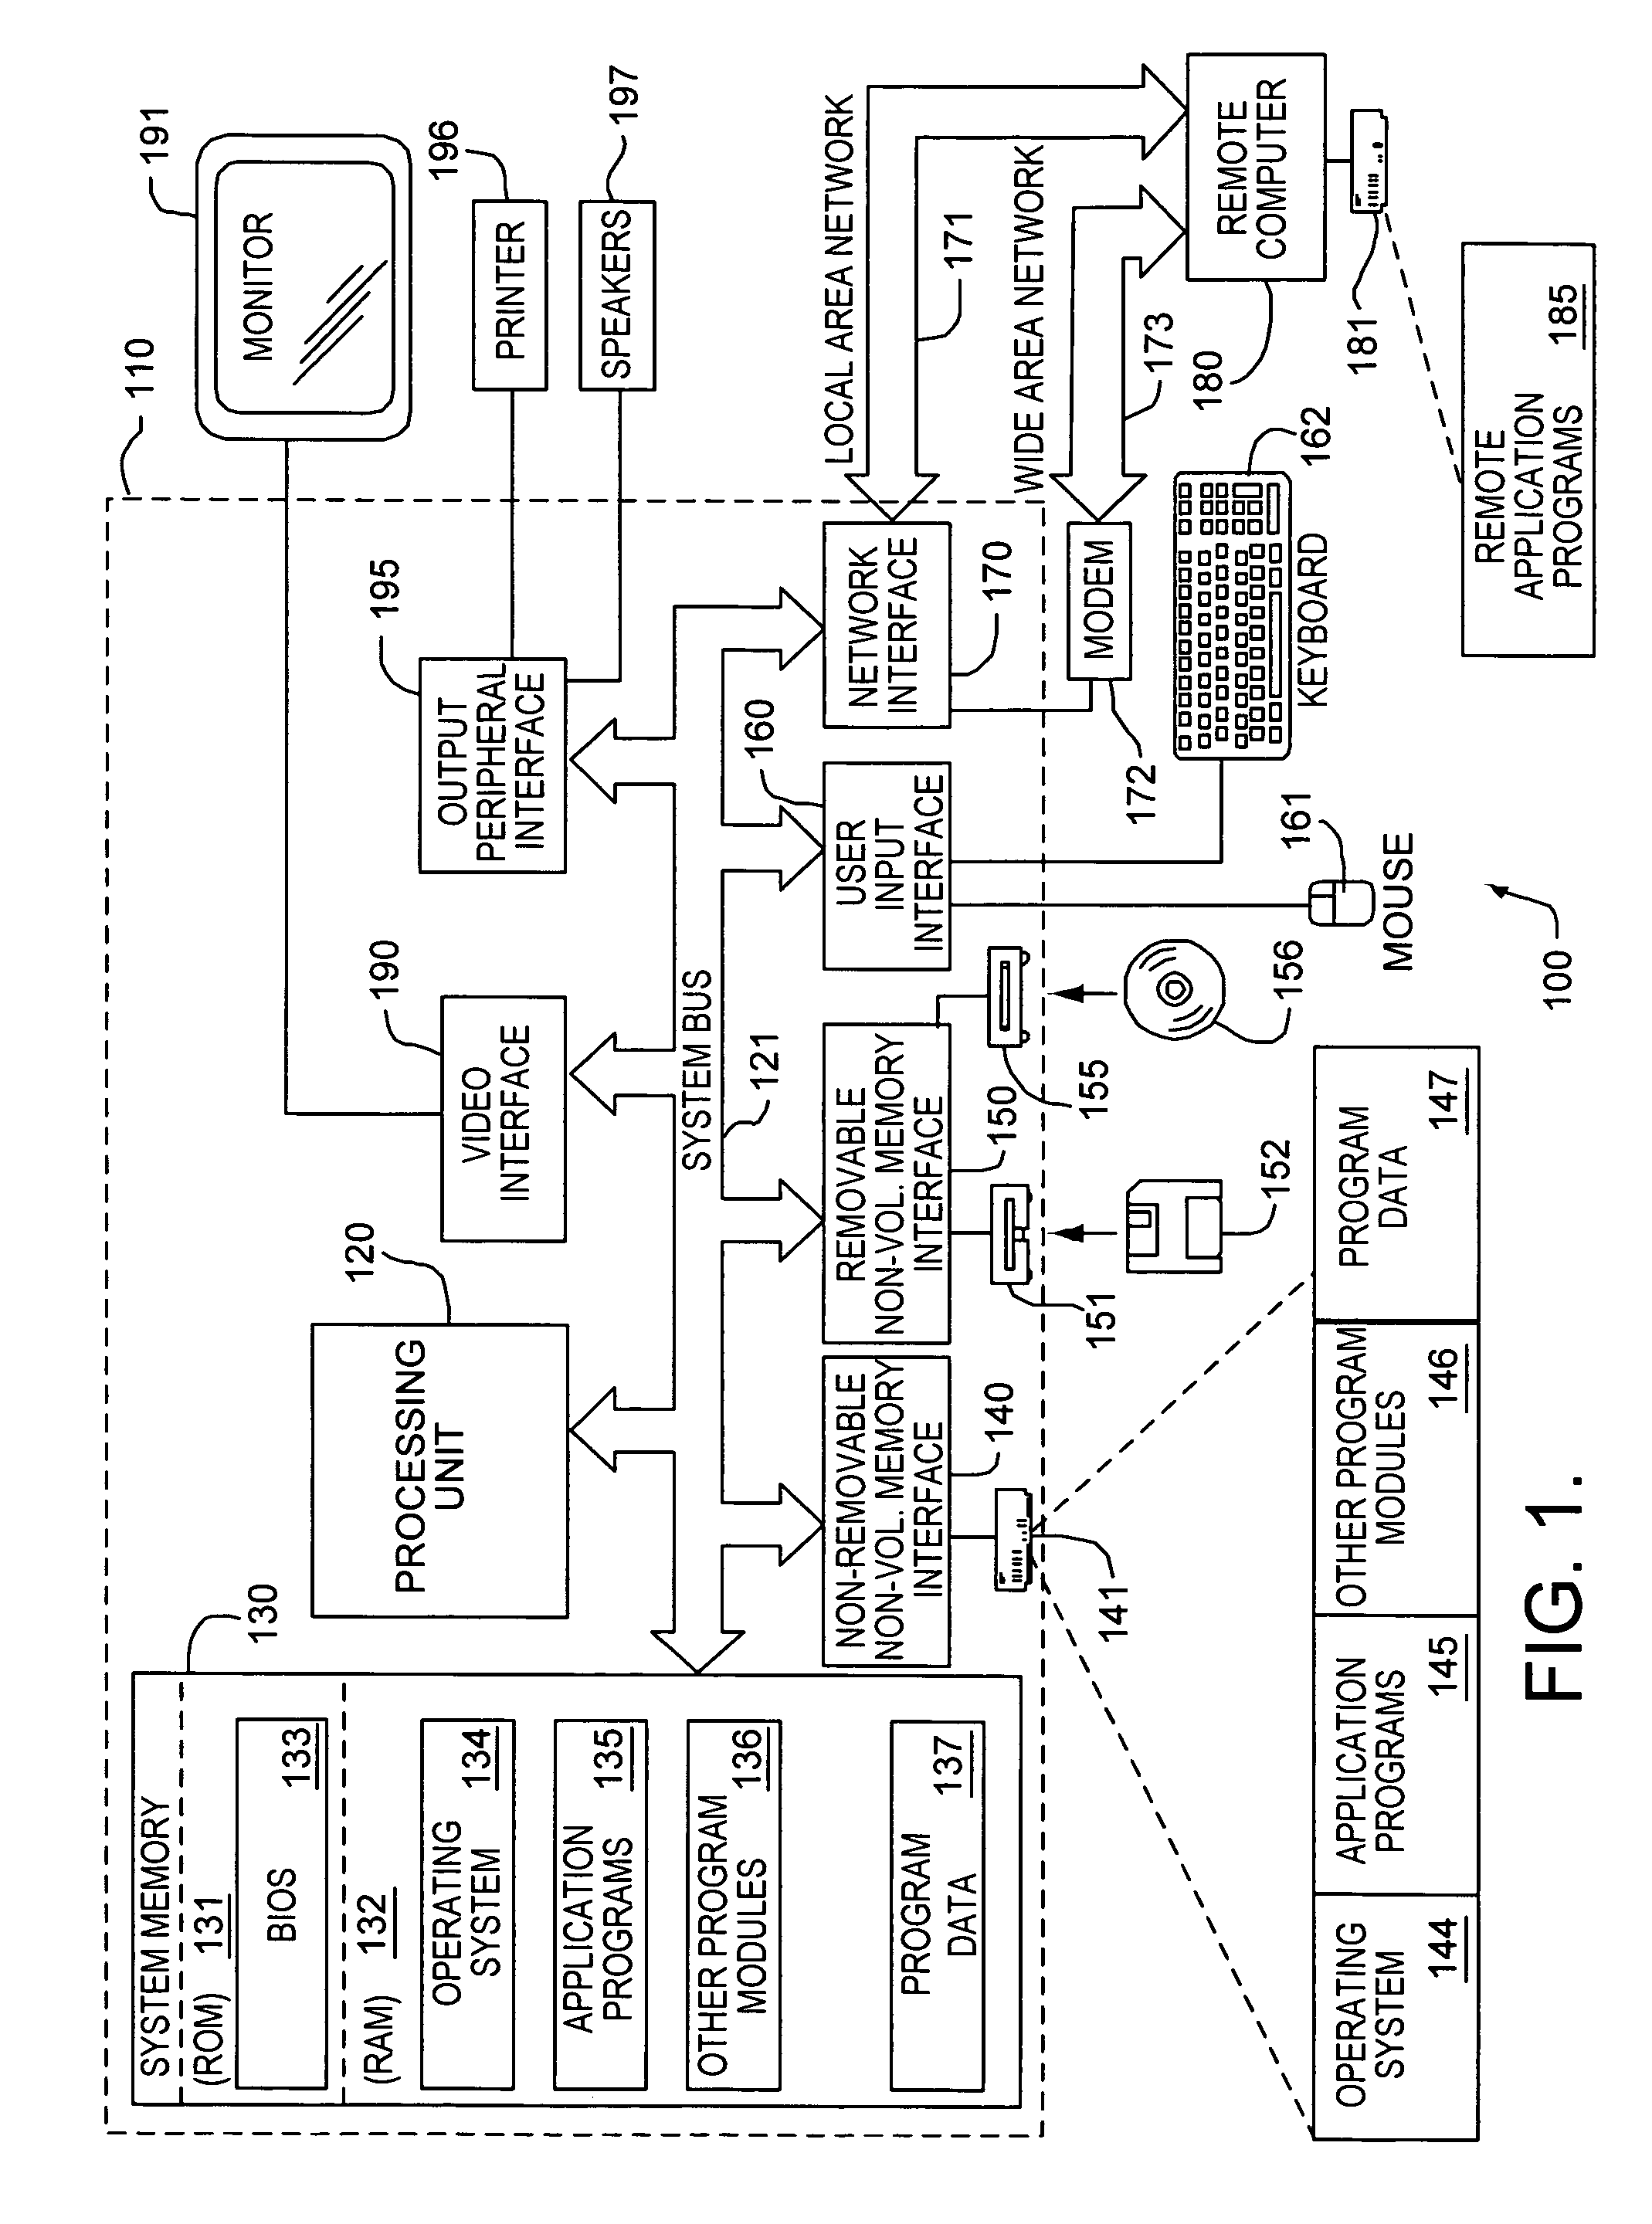 Method and system for a non-georedundant failover system